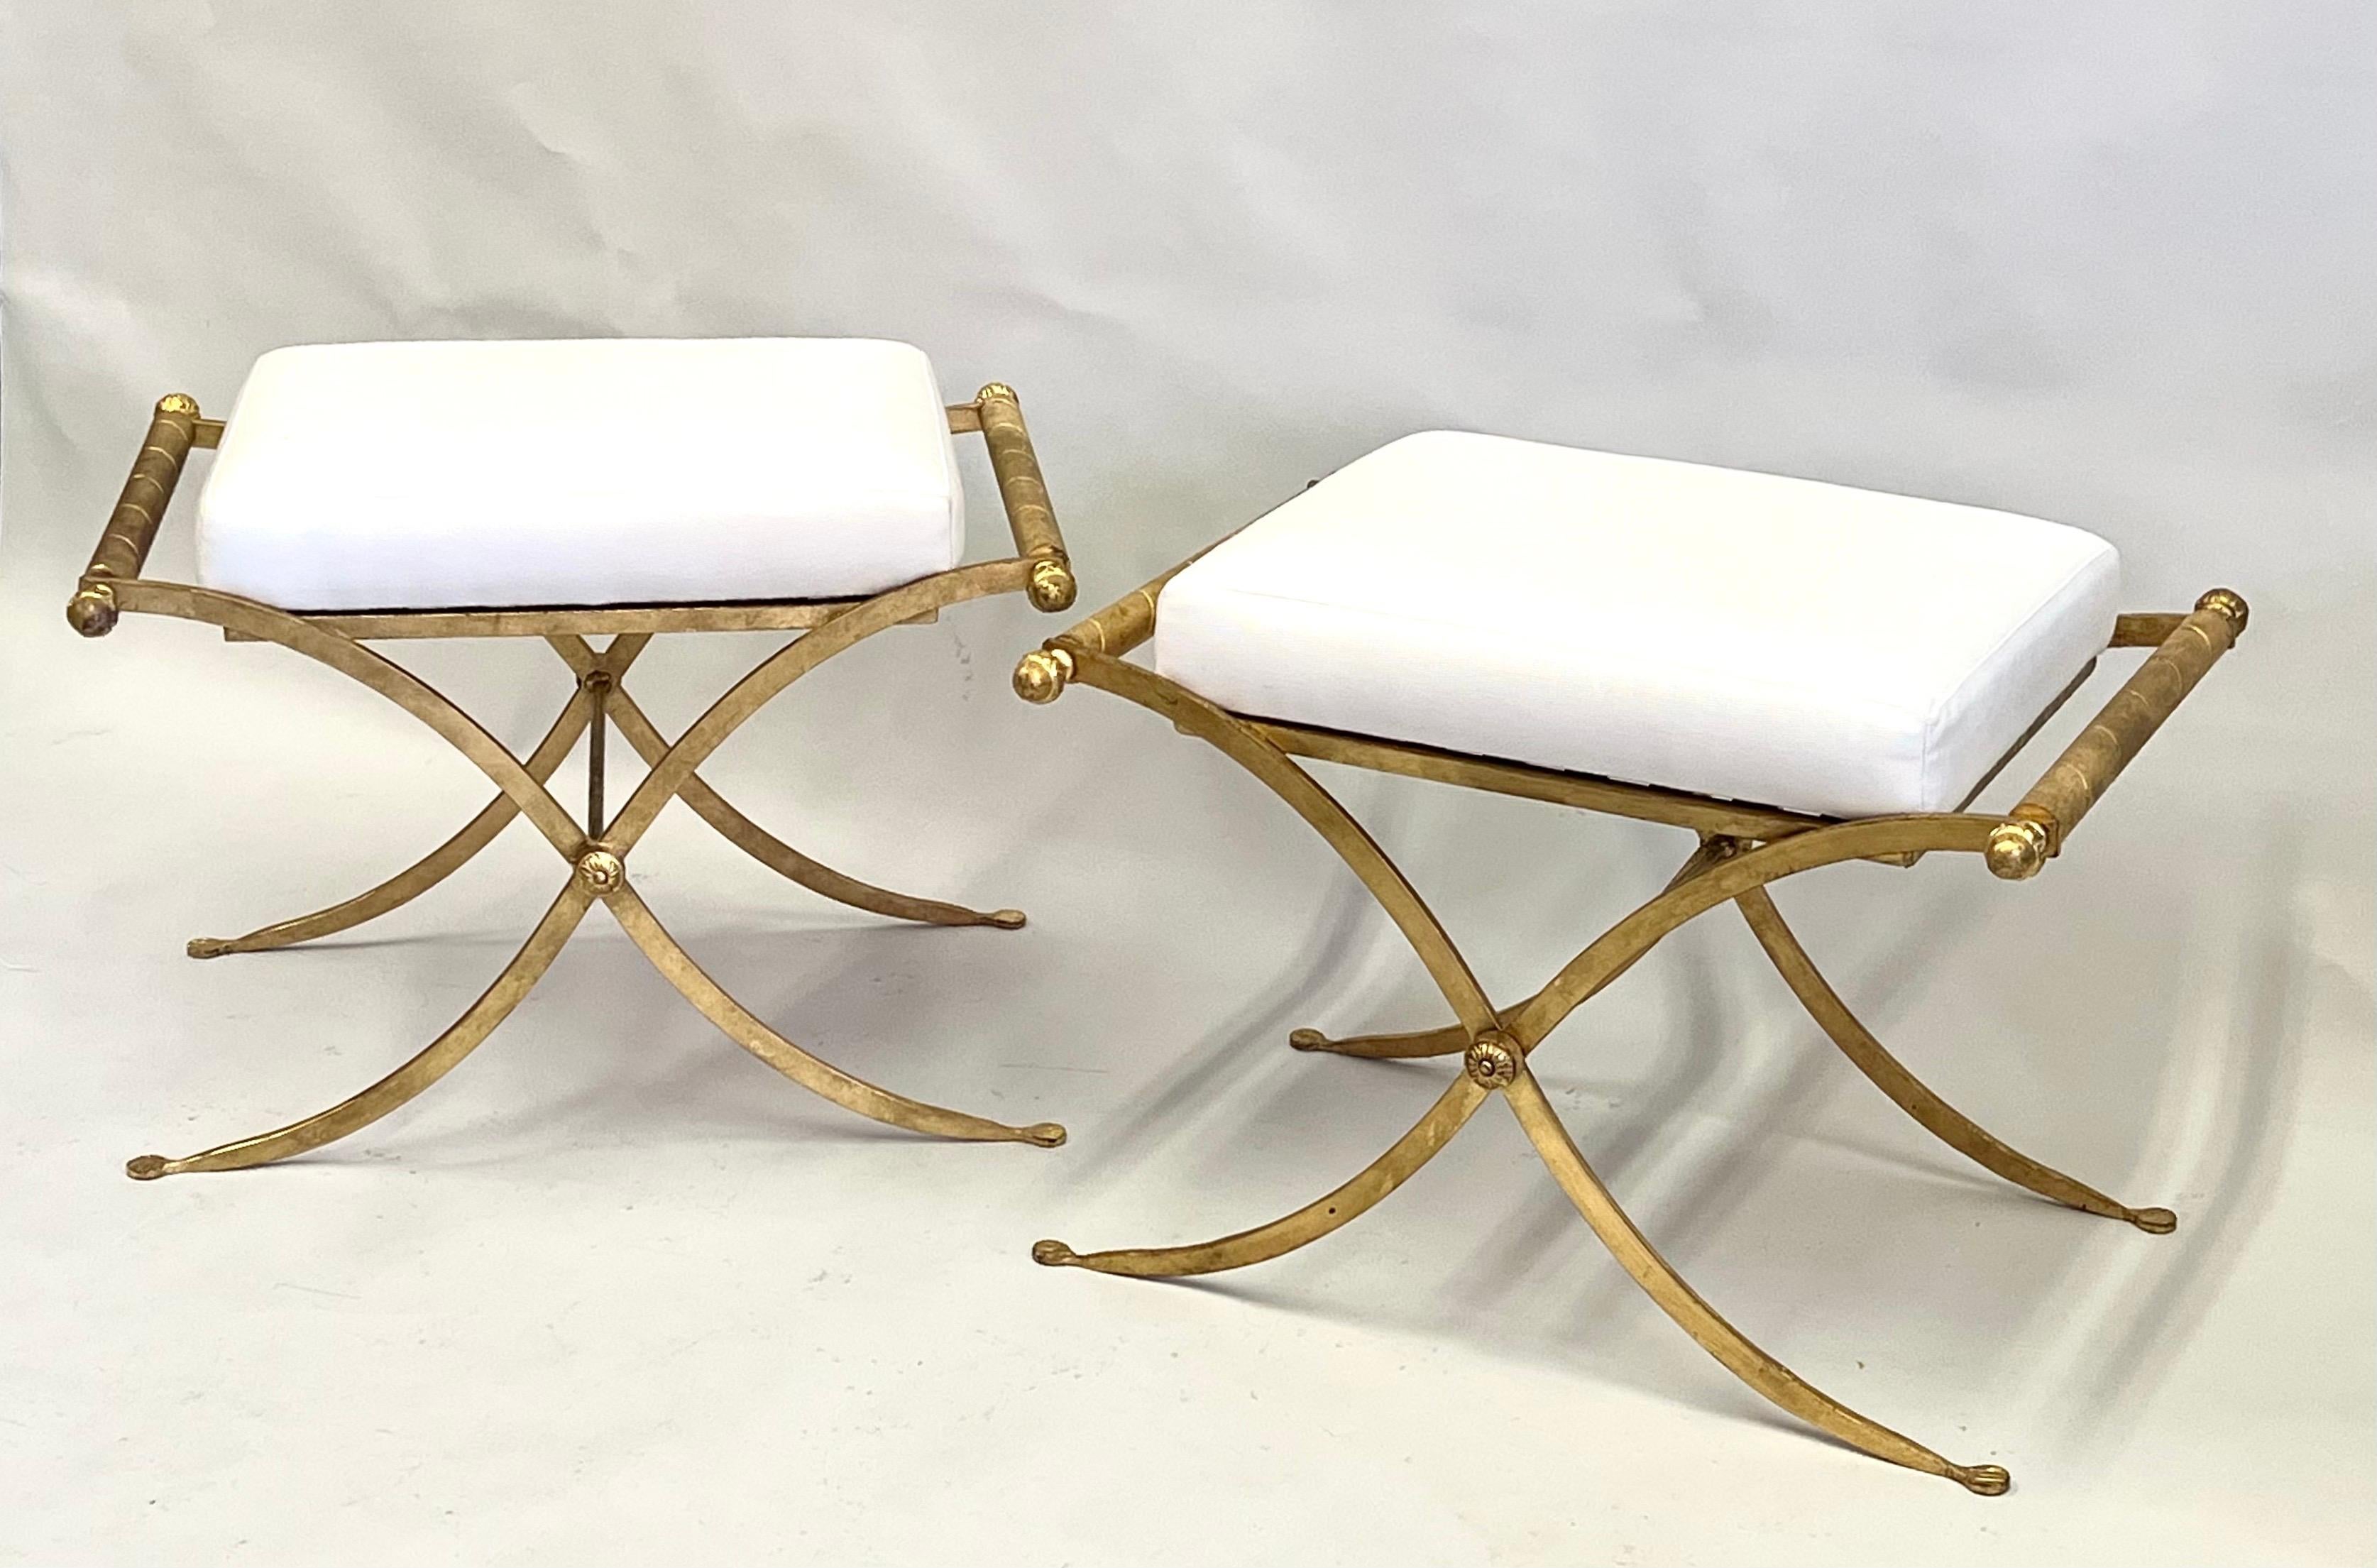 Elegant and Timeless Pair of French Midcentury Modern Neoclassical Benches or Stools Attributed to Raymond Subes circa 1930. The pieces are composed of hand gilt and hand wrought iron frames which support upholstered seats. The metal work is formed